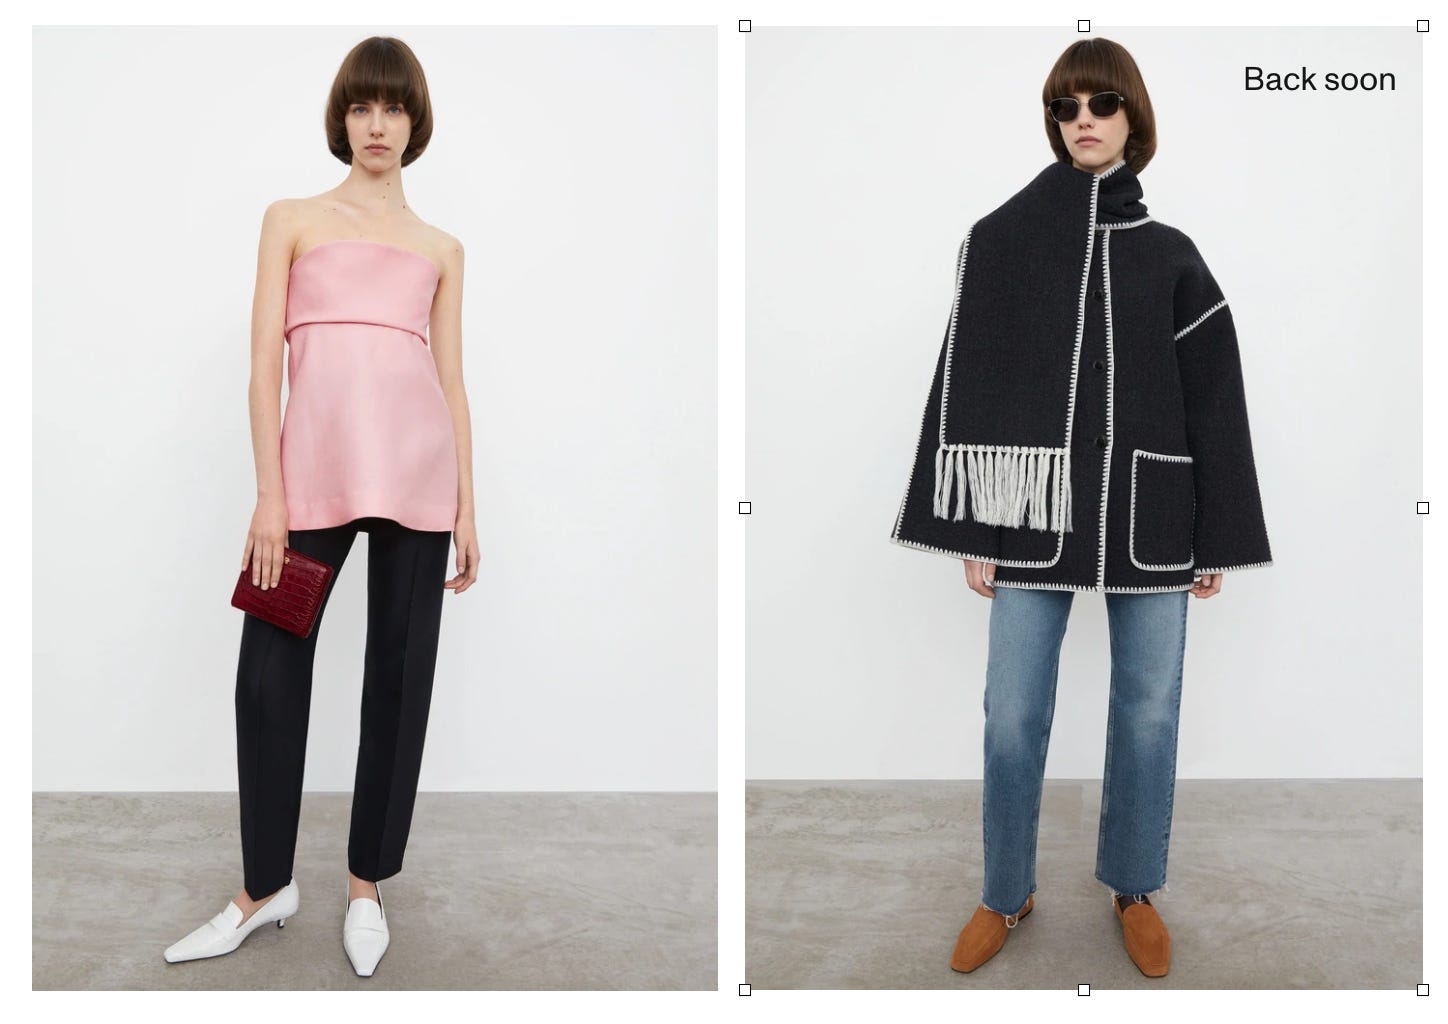 Céline's Phoebe Philo just says no to many things – and yes to one